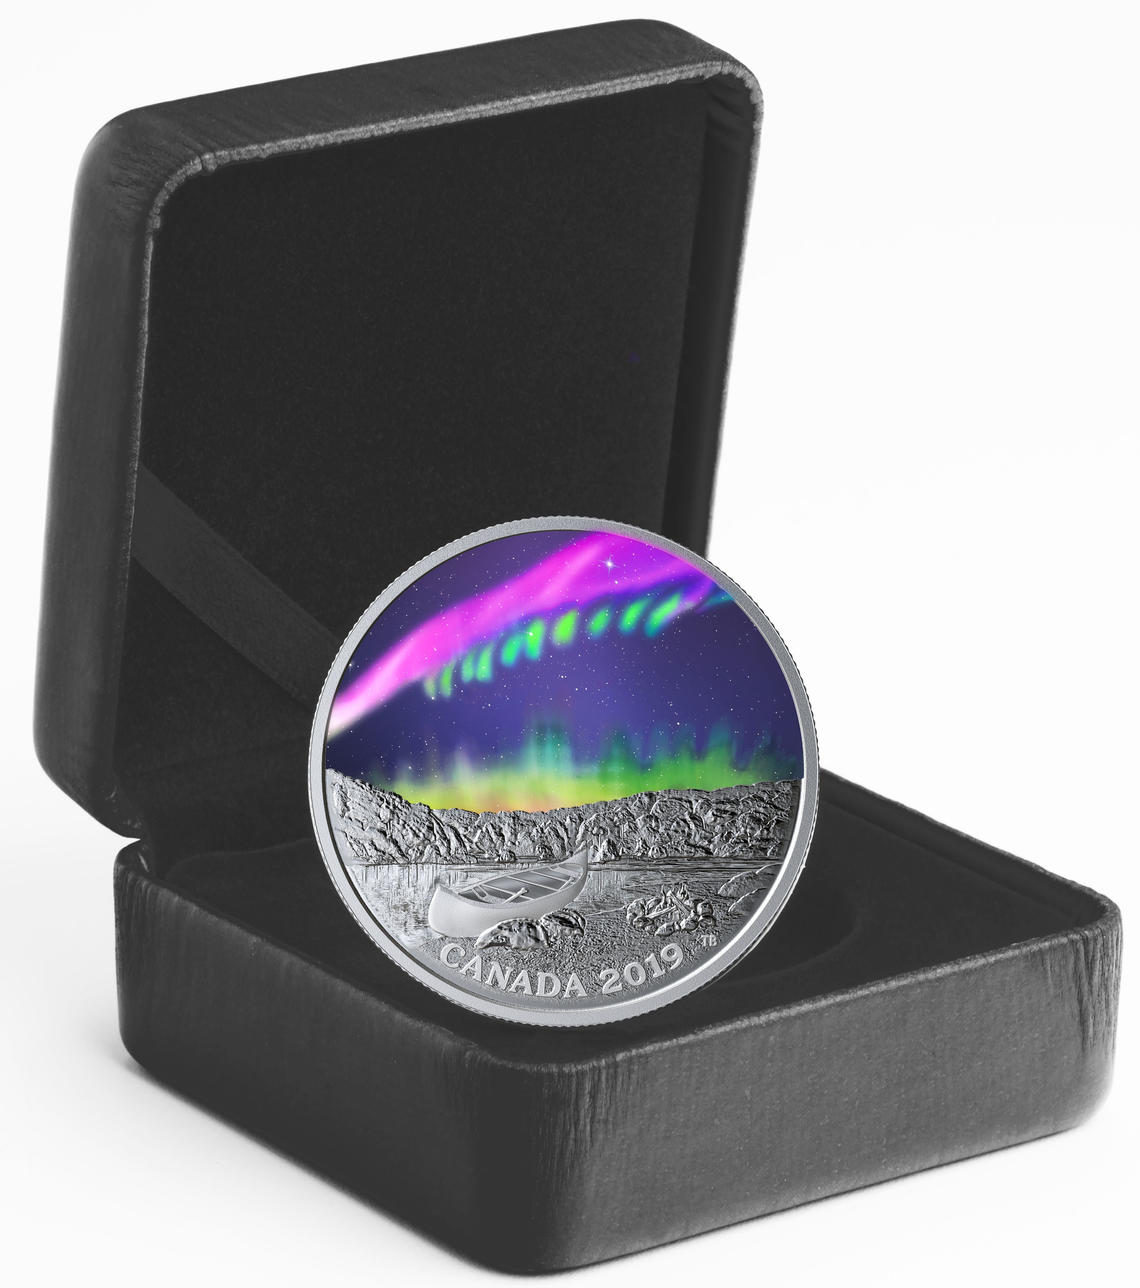 The Royal Canadian Mint has recognized the STEVE phenomenon with a new $20 fine silver collectors’ coin. It is the second coin in the Mint’s three-coin “Sky Wonders” series, featuring three different naturally occurring light displays in the sky.